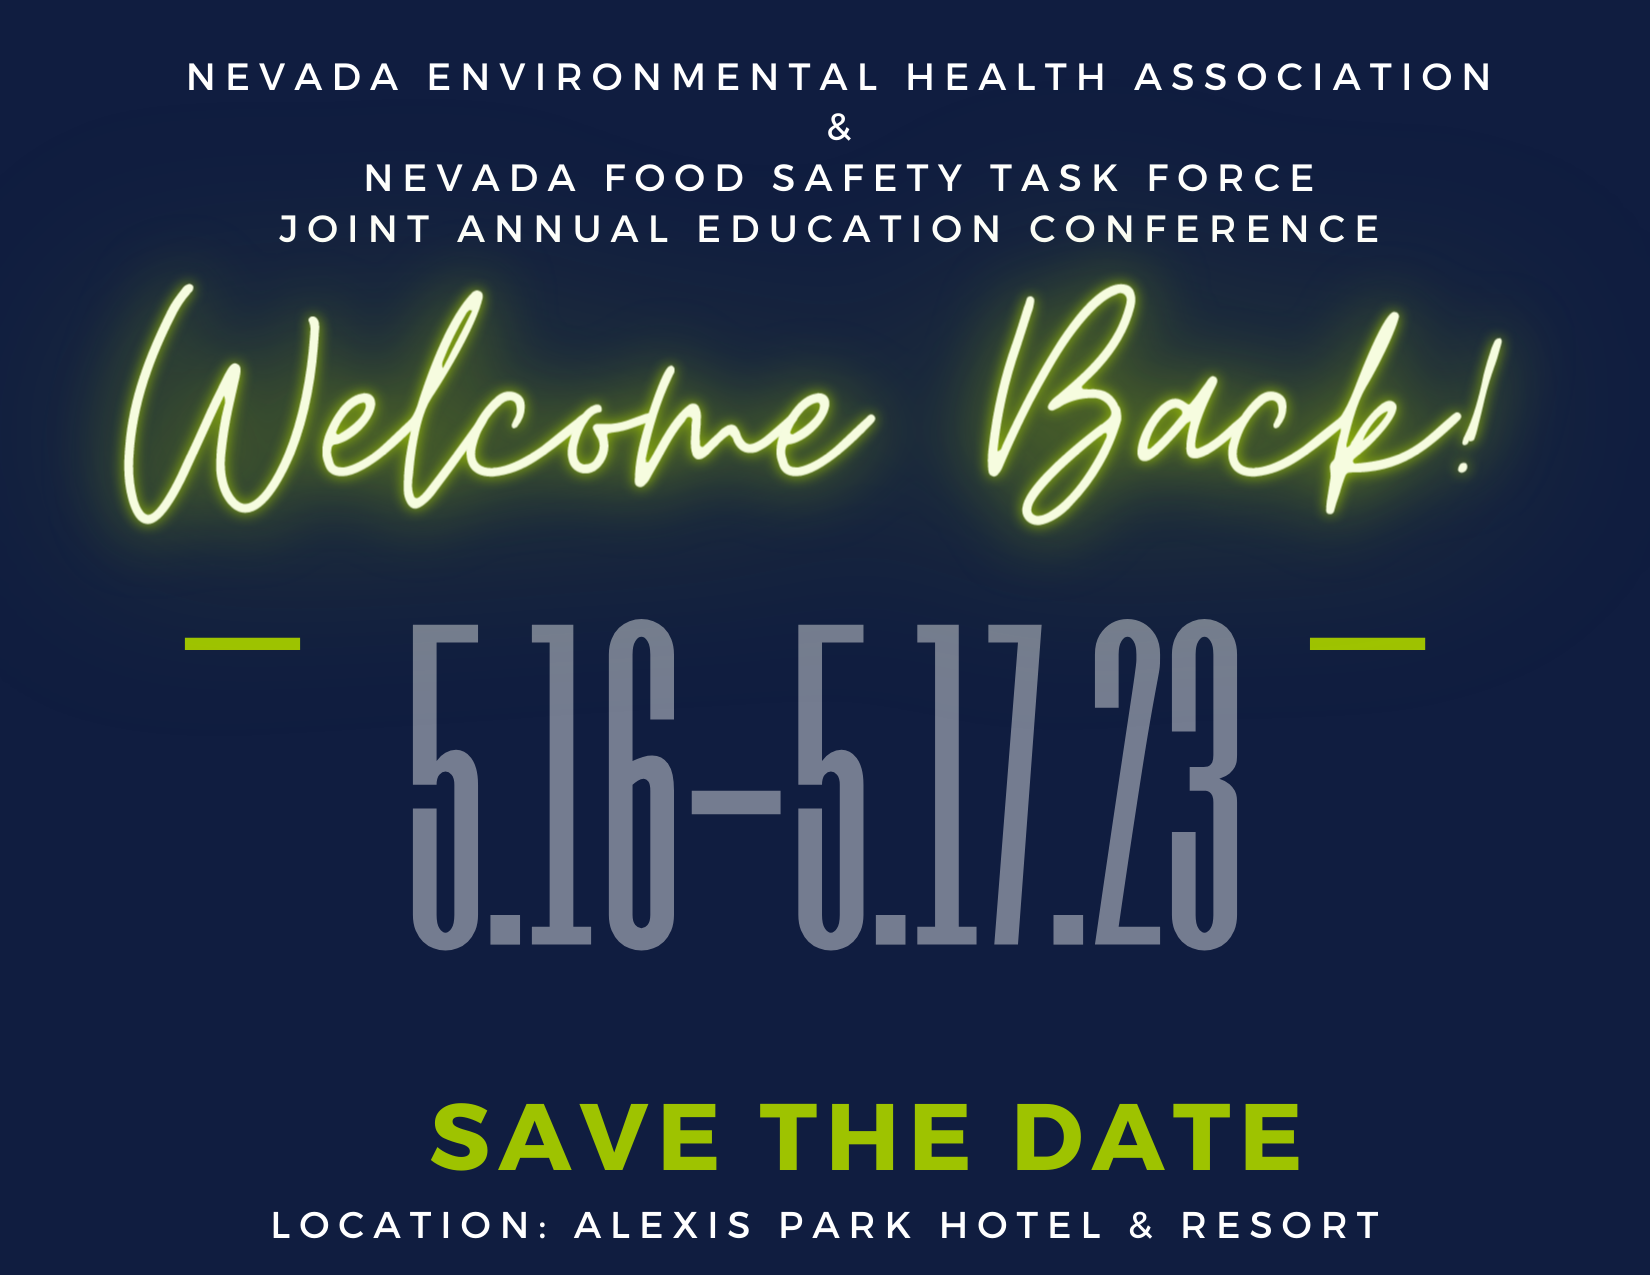 nfstf and nveha conference 2023